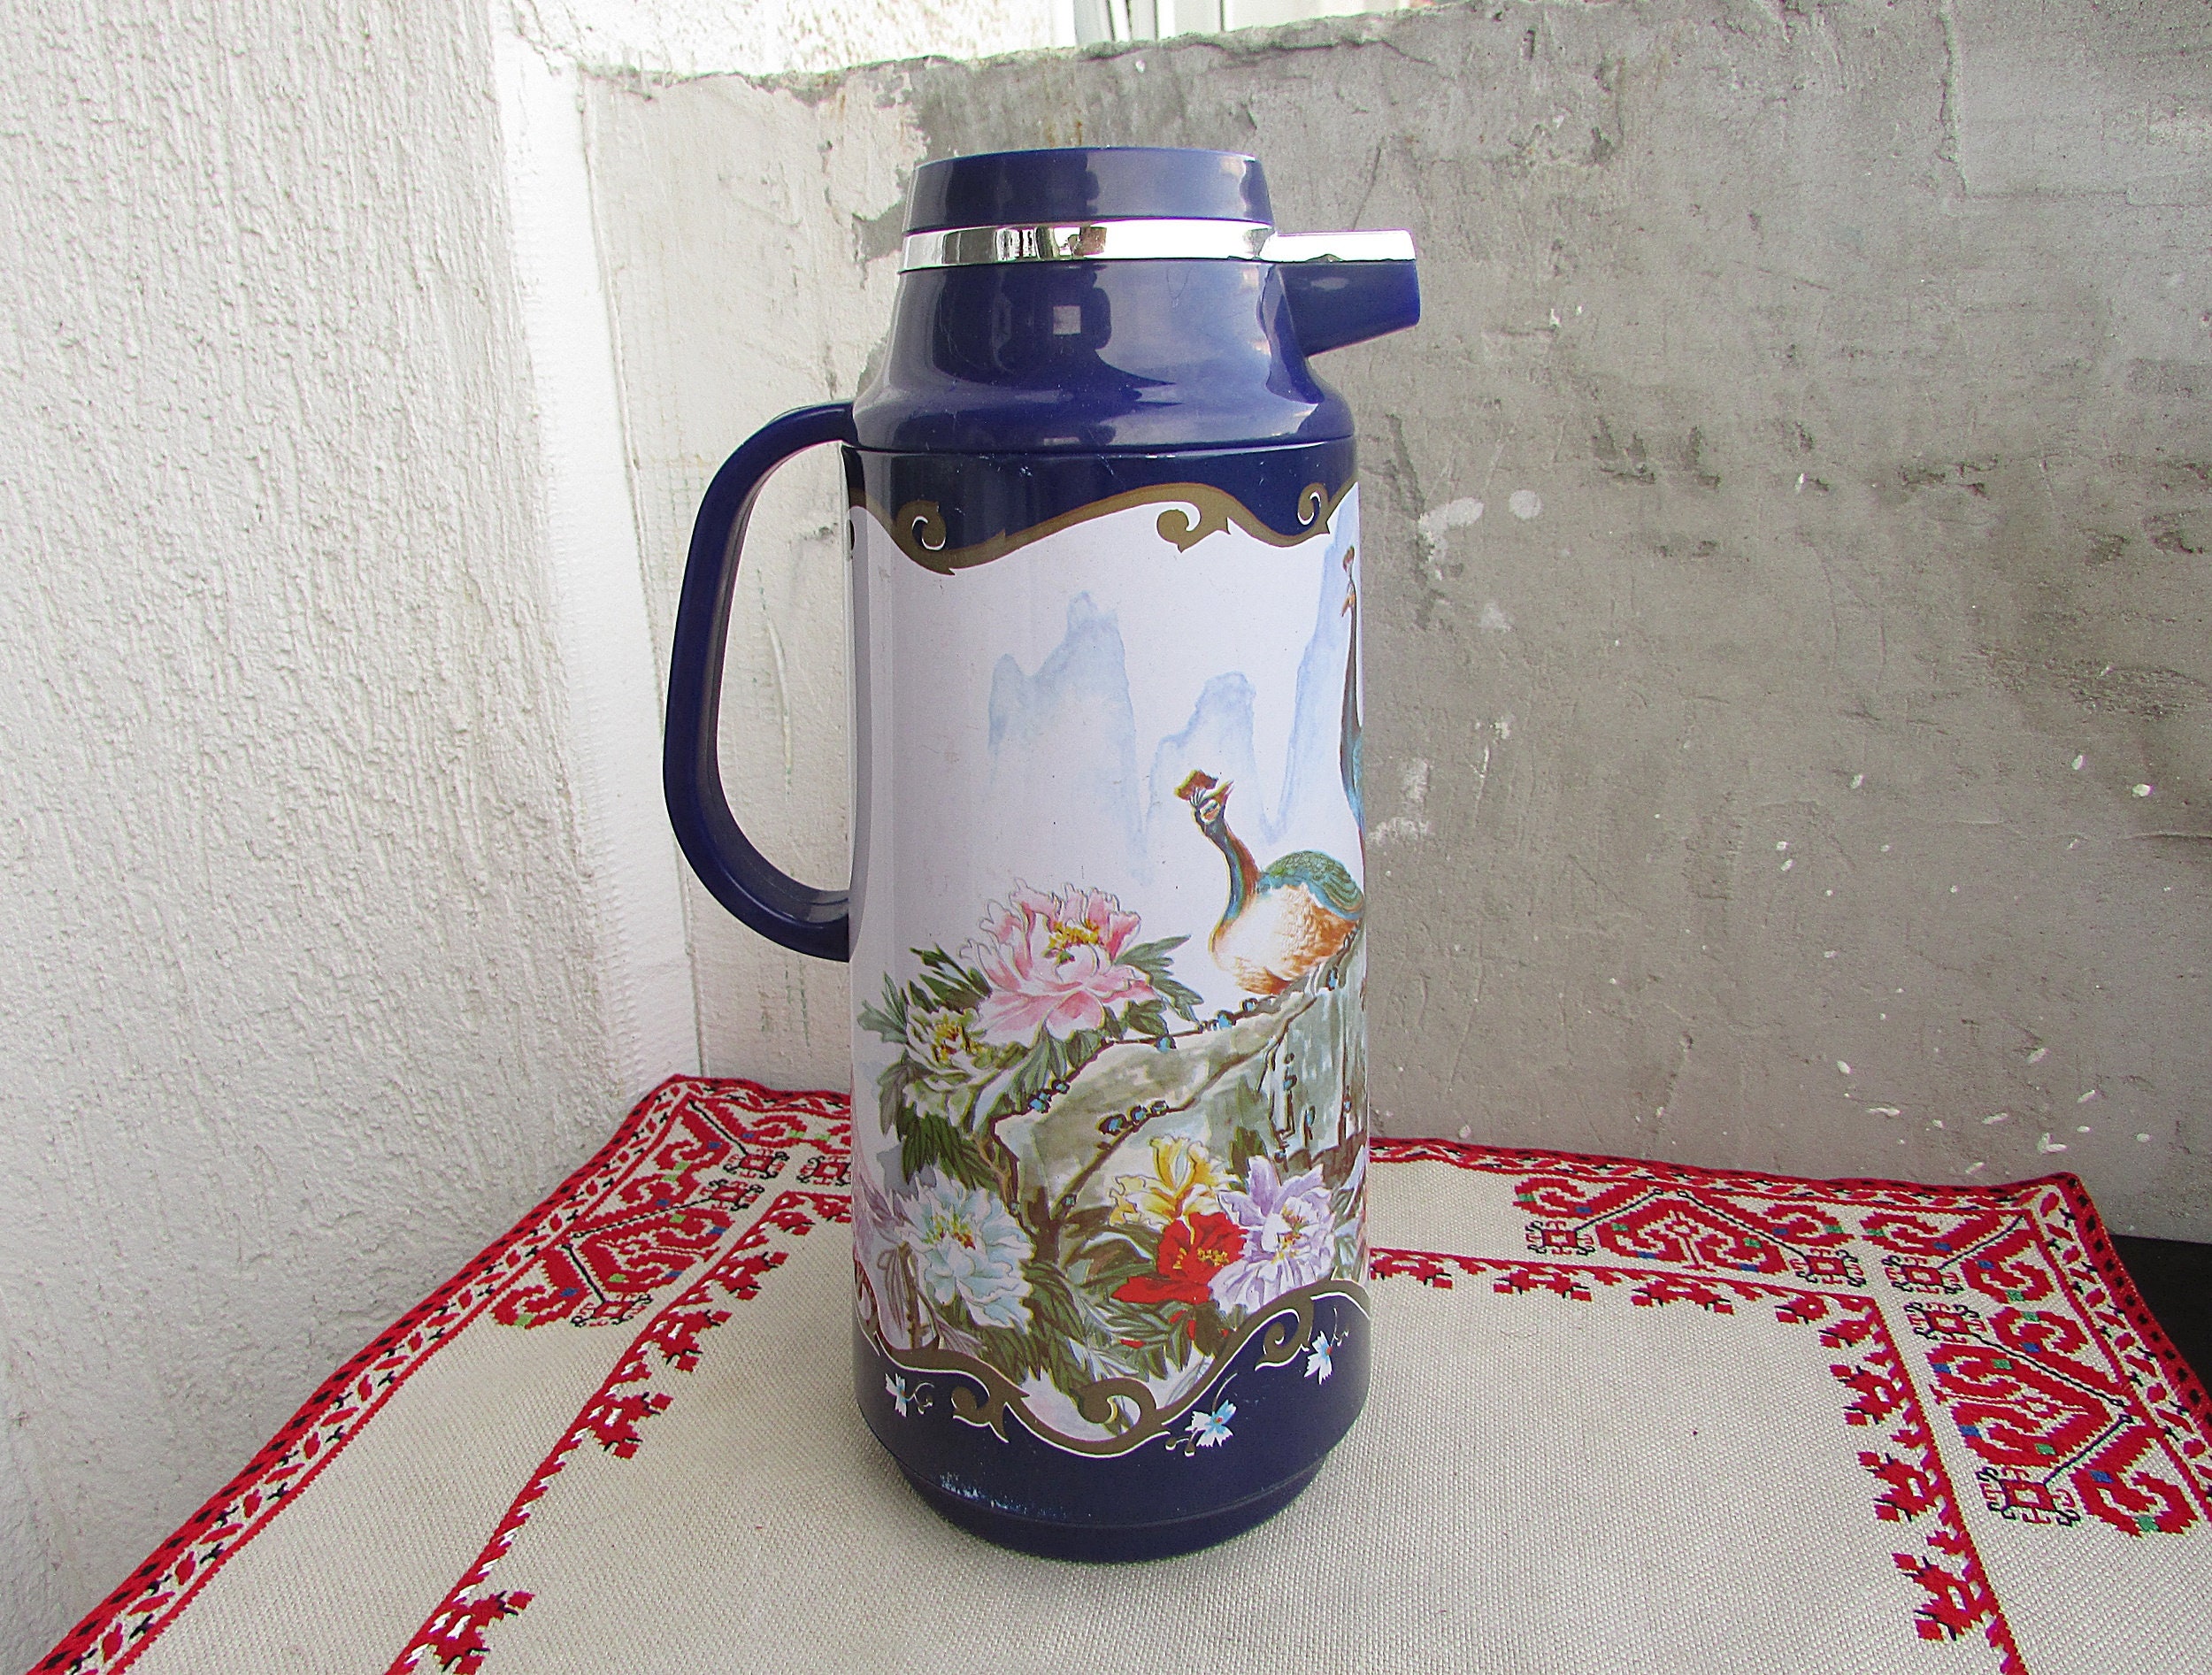 Vintage Plastic Thermos, Old Travel Thermos for Cold and Hot Drinks, Coffee  Tea Thermos, Camping Equipment, Retro Collectible Thermos -  Hong Kong